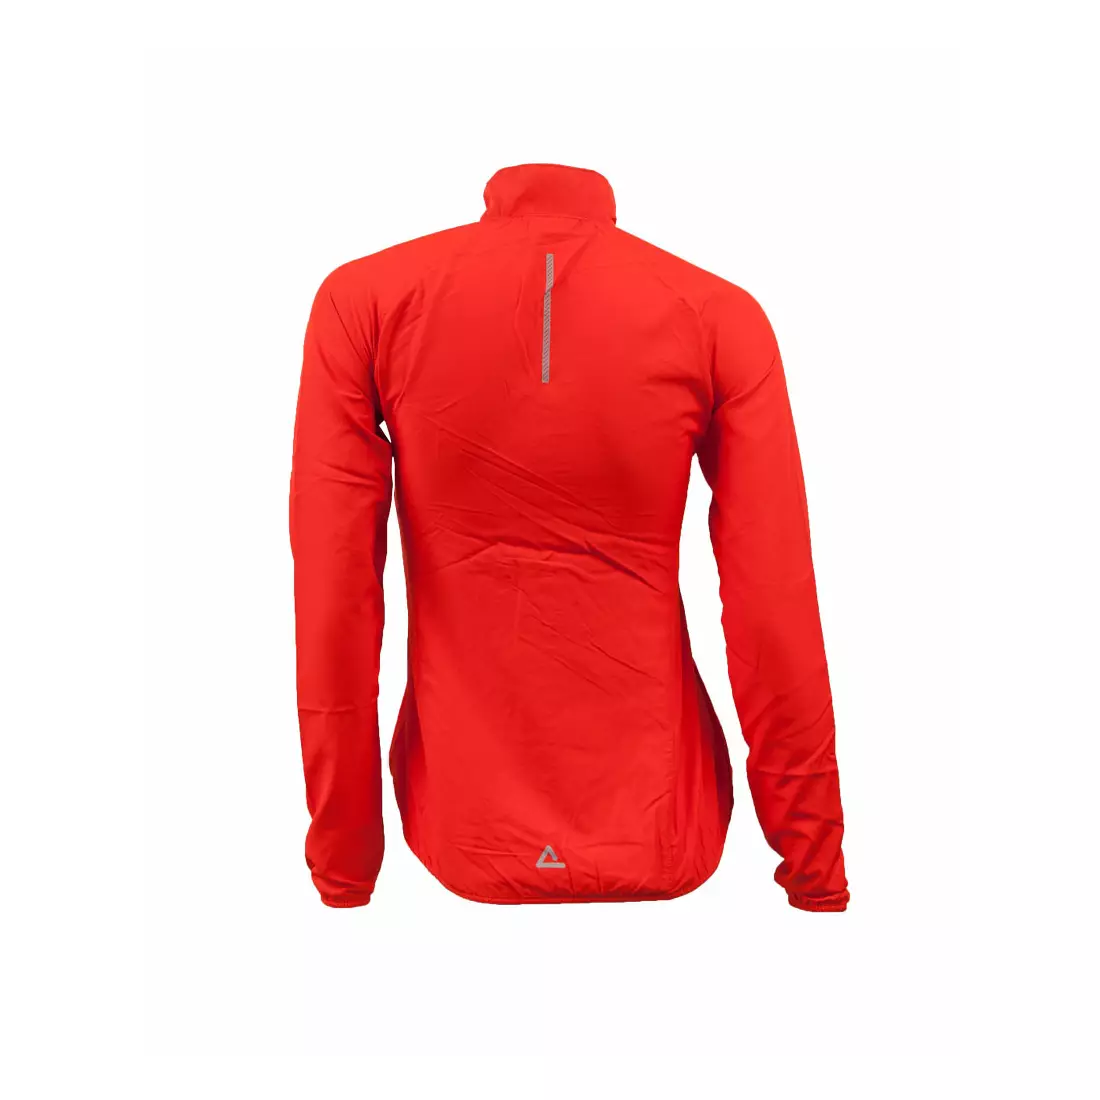 DARE2B Blighted Windshell Women's Cycling Windbreaker DWL106-657, Color: Red